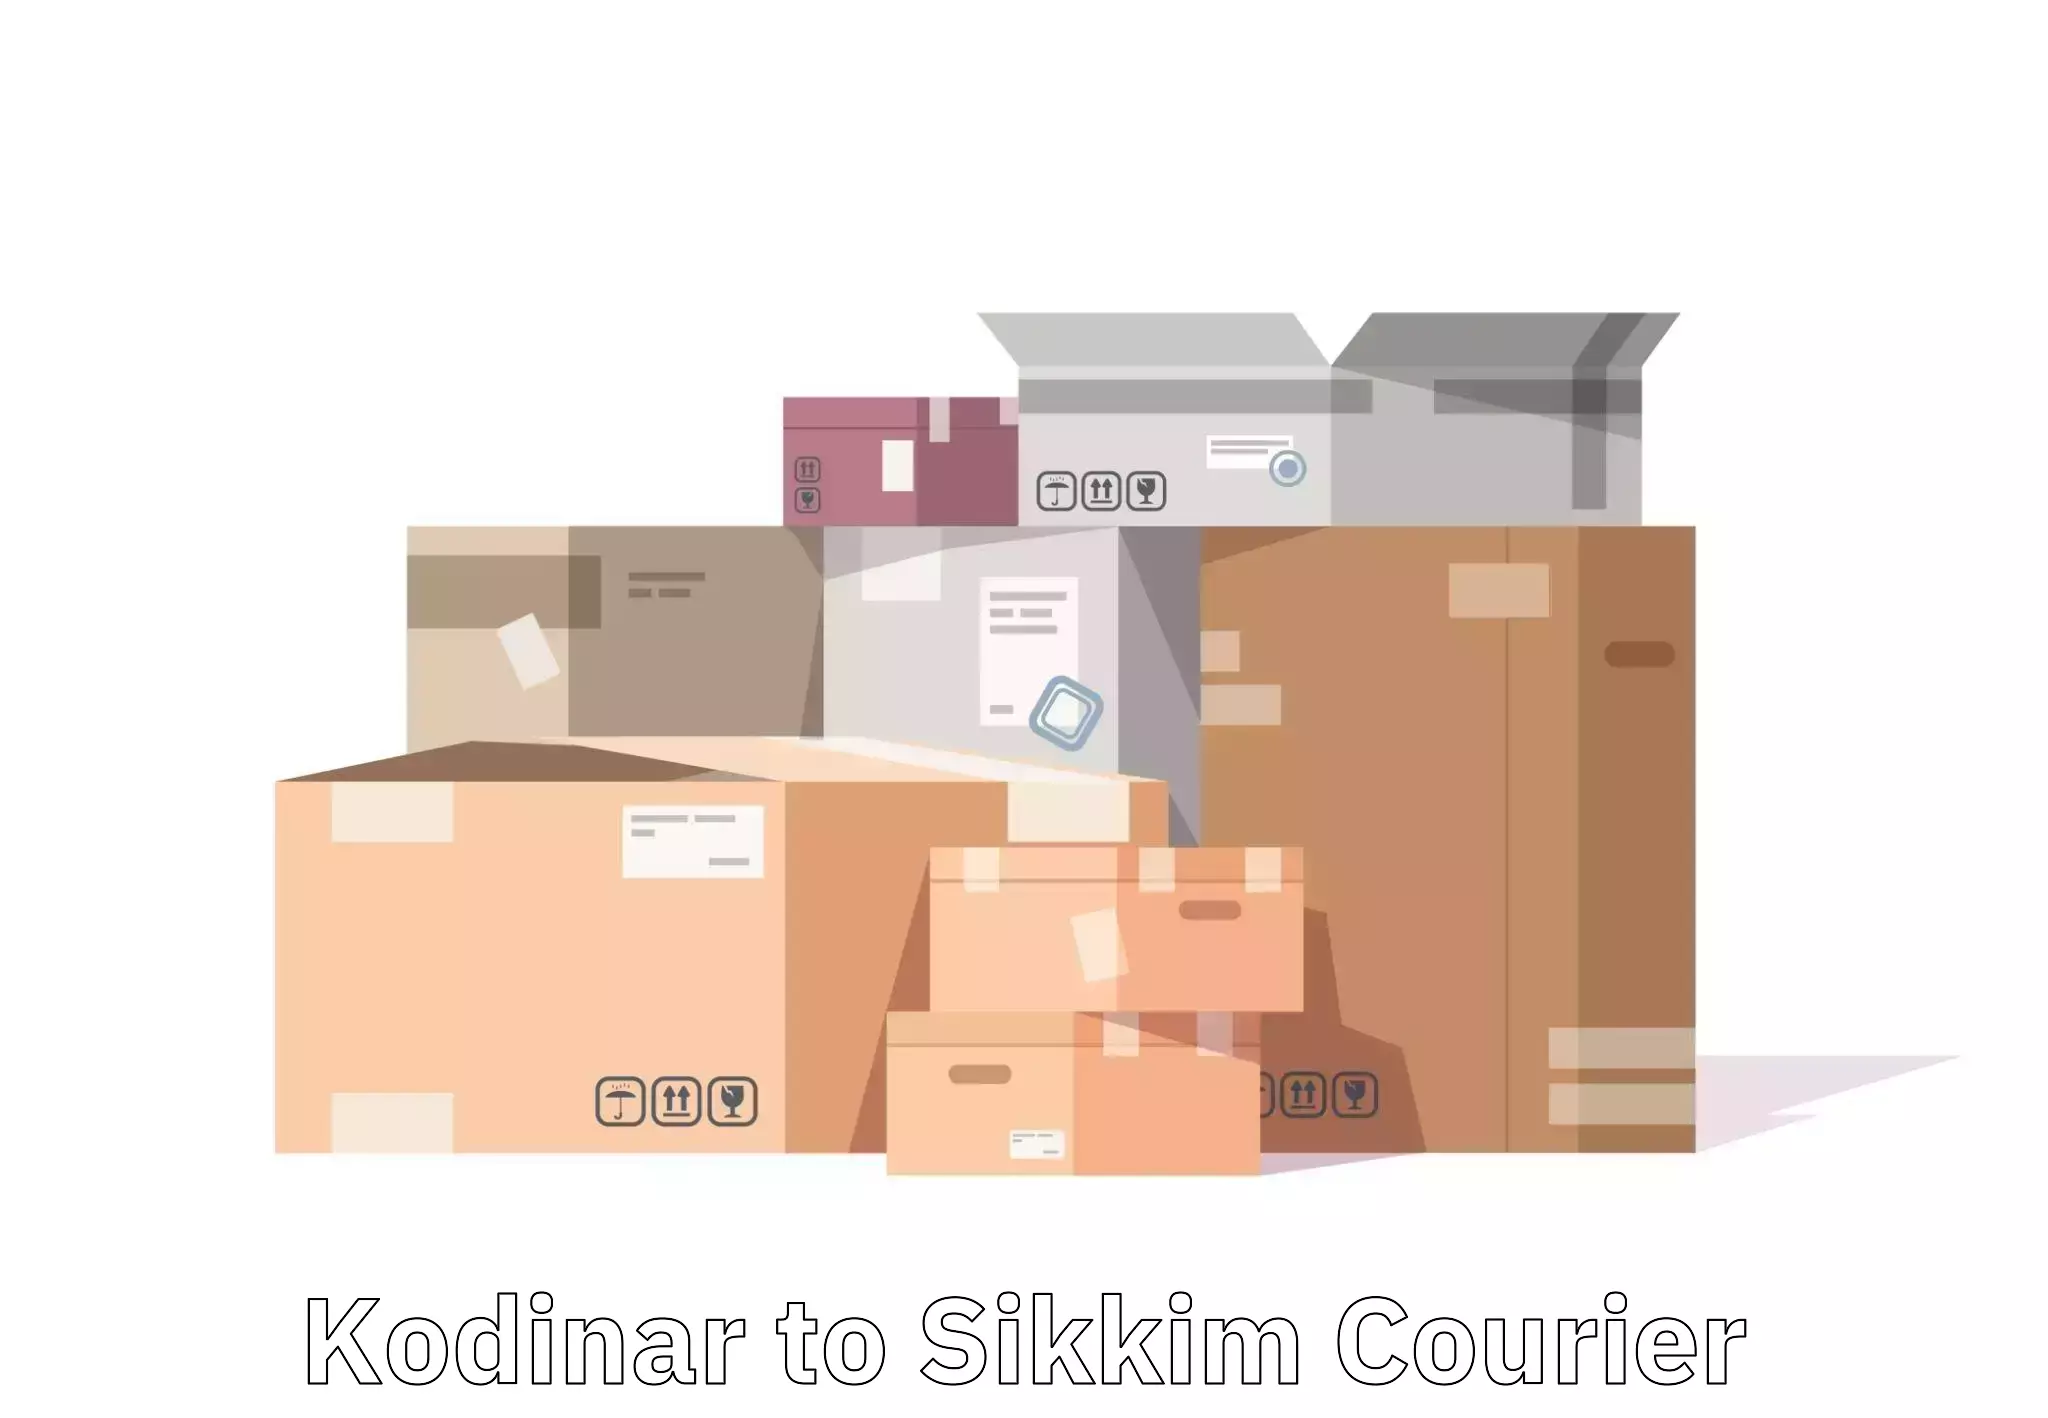 Luggage shipment specialists Kodinar to Pelling